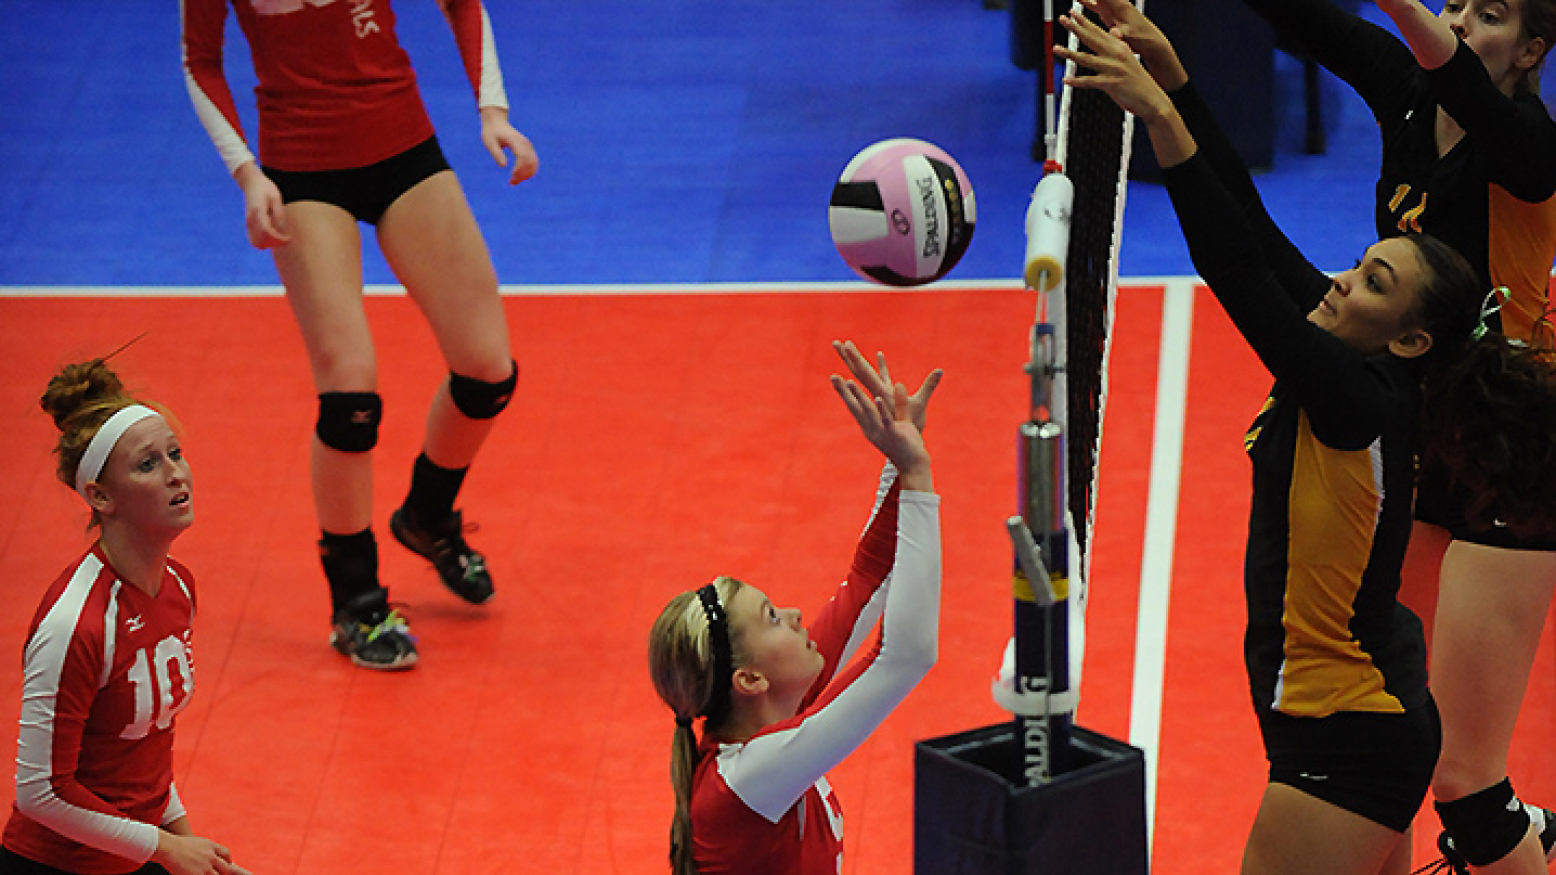 Female volleyball players on a bright red and blue court. A player at the center of the image is about to hit the ball upward while multiple opponents have their hands up at the net, preparing to block the ball. 